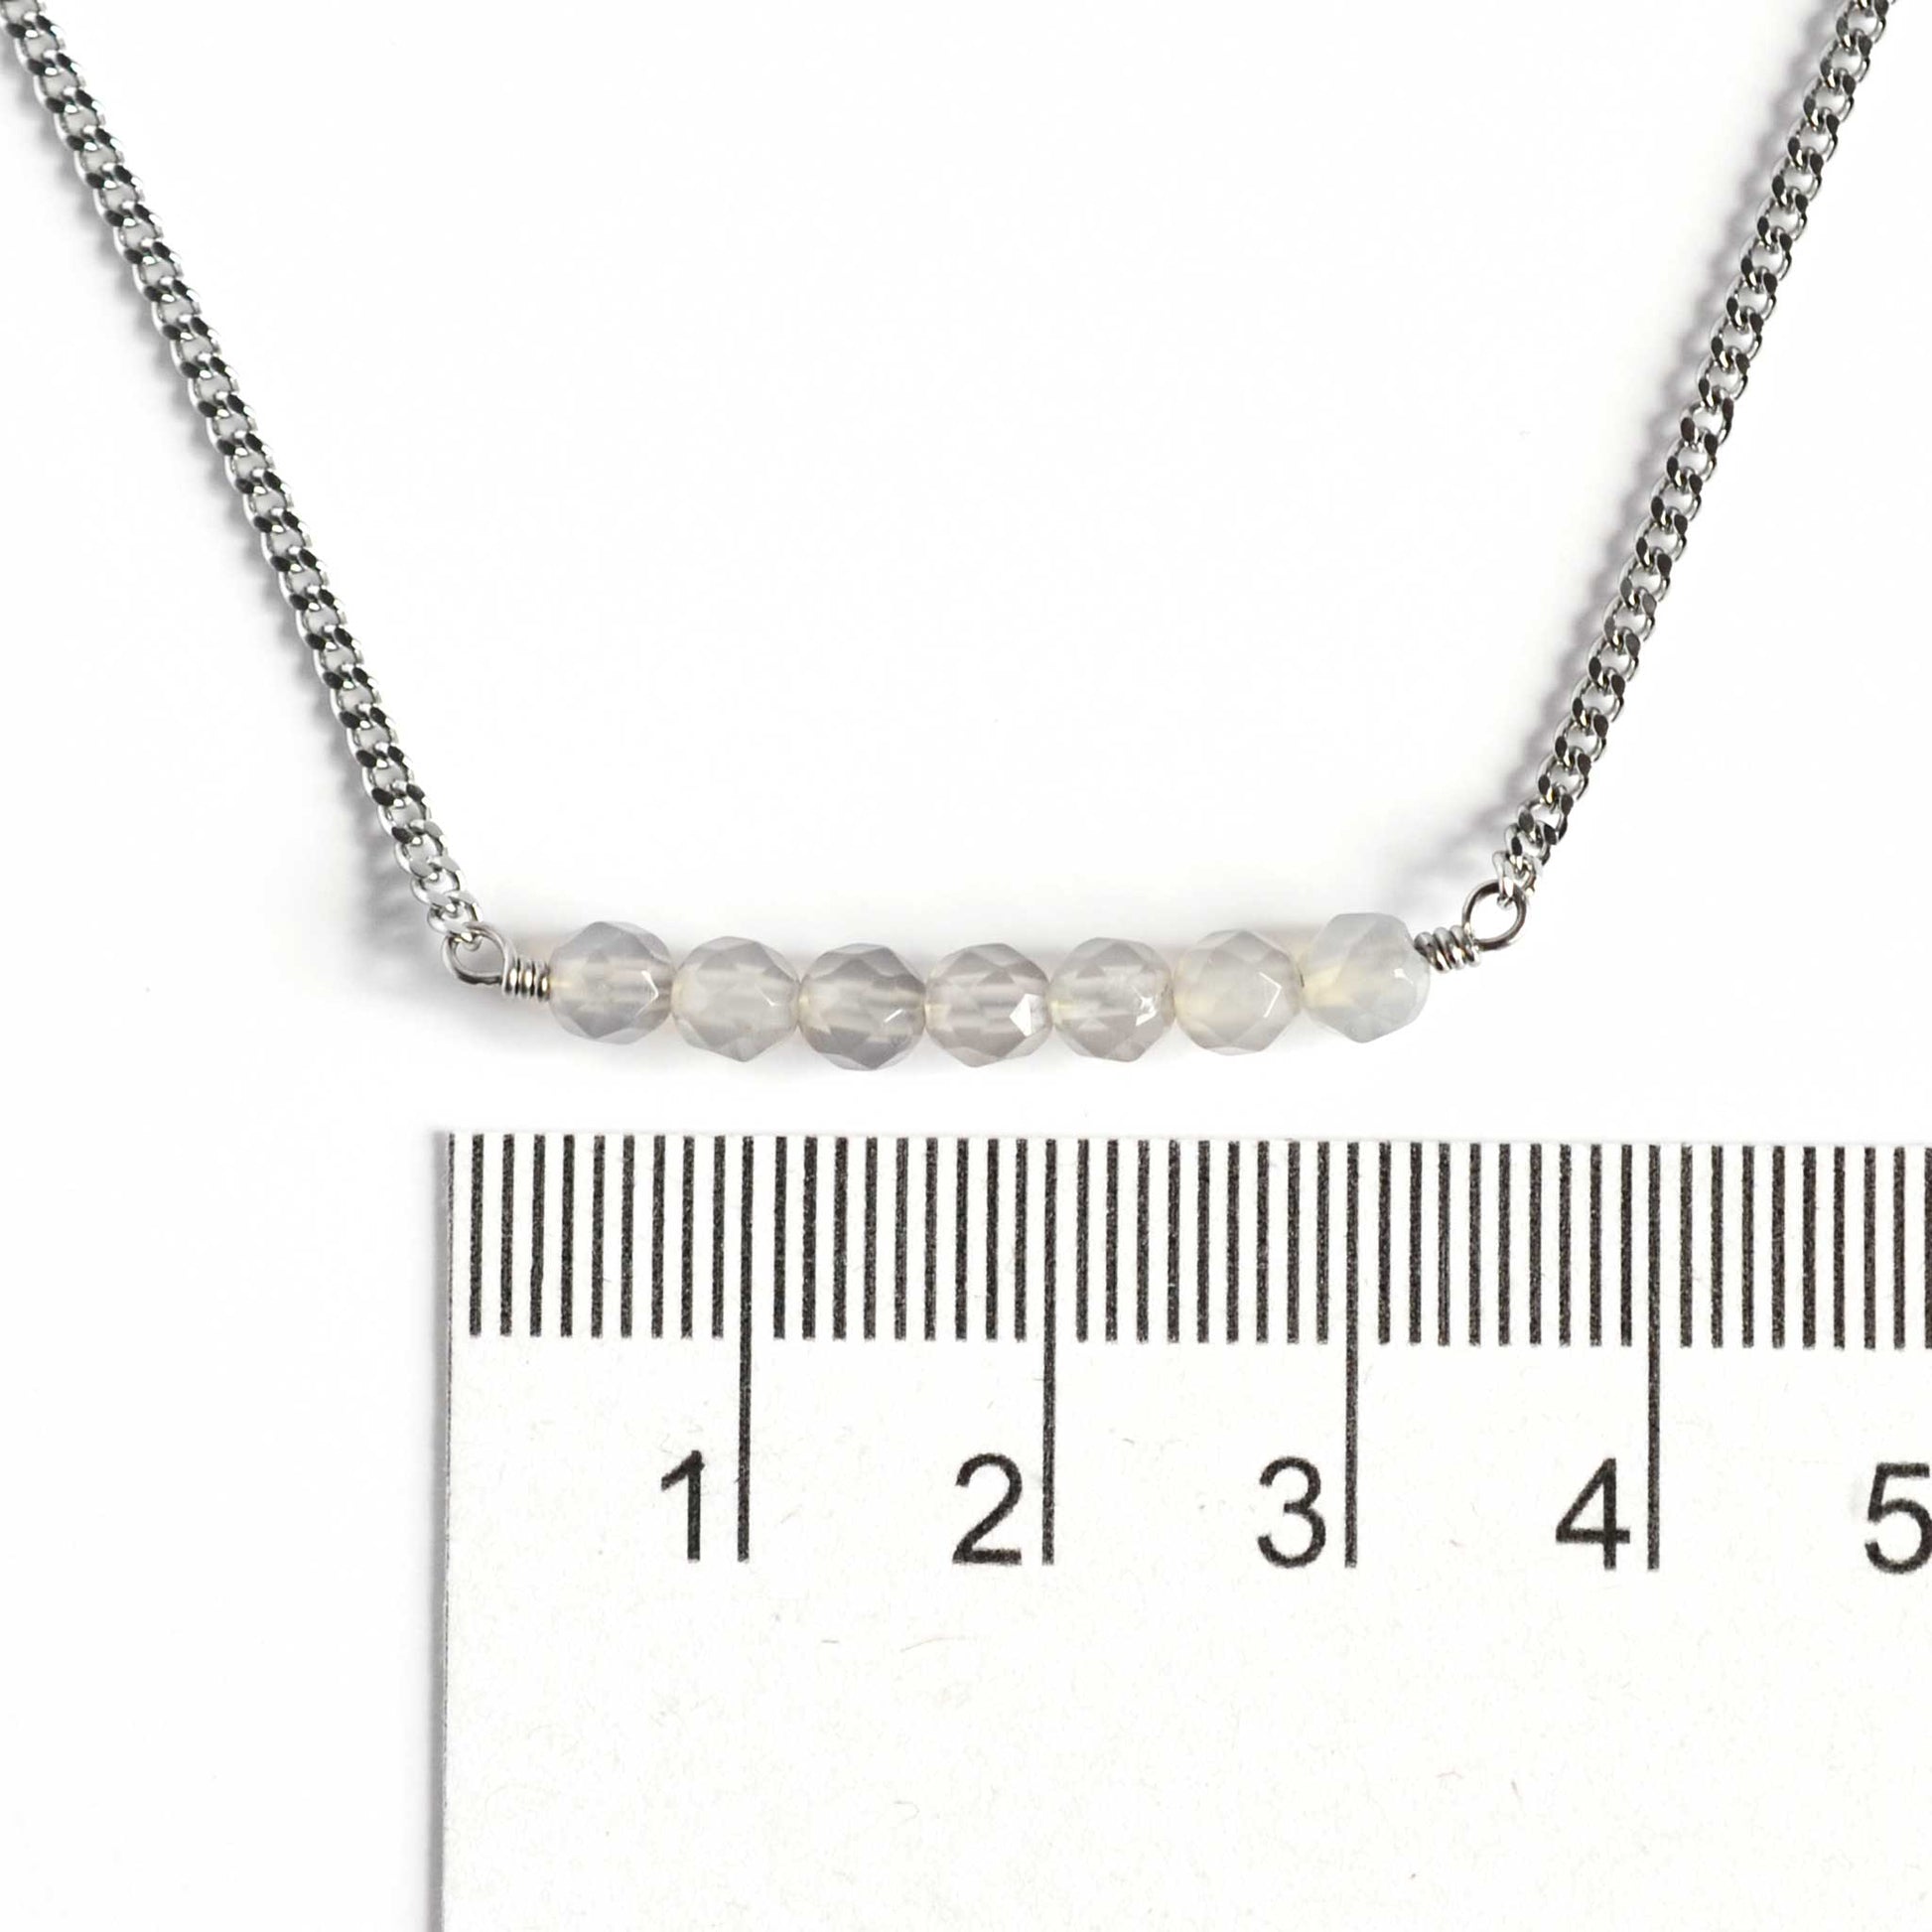 Dainty Grey Agate necklace with 4mm gemstone beads next to ruler